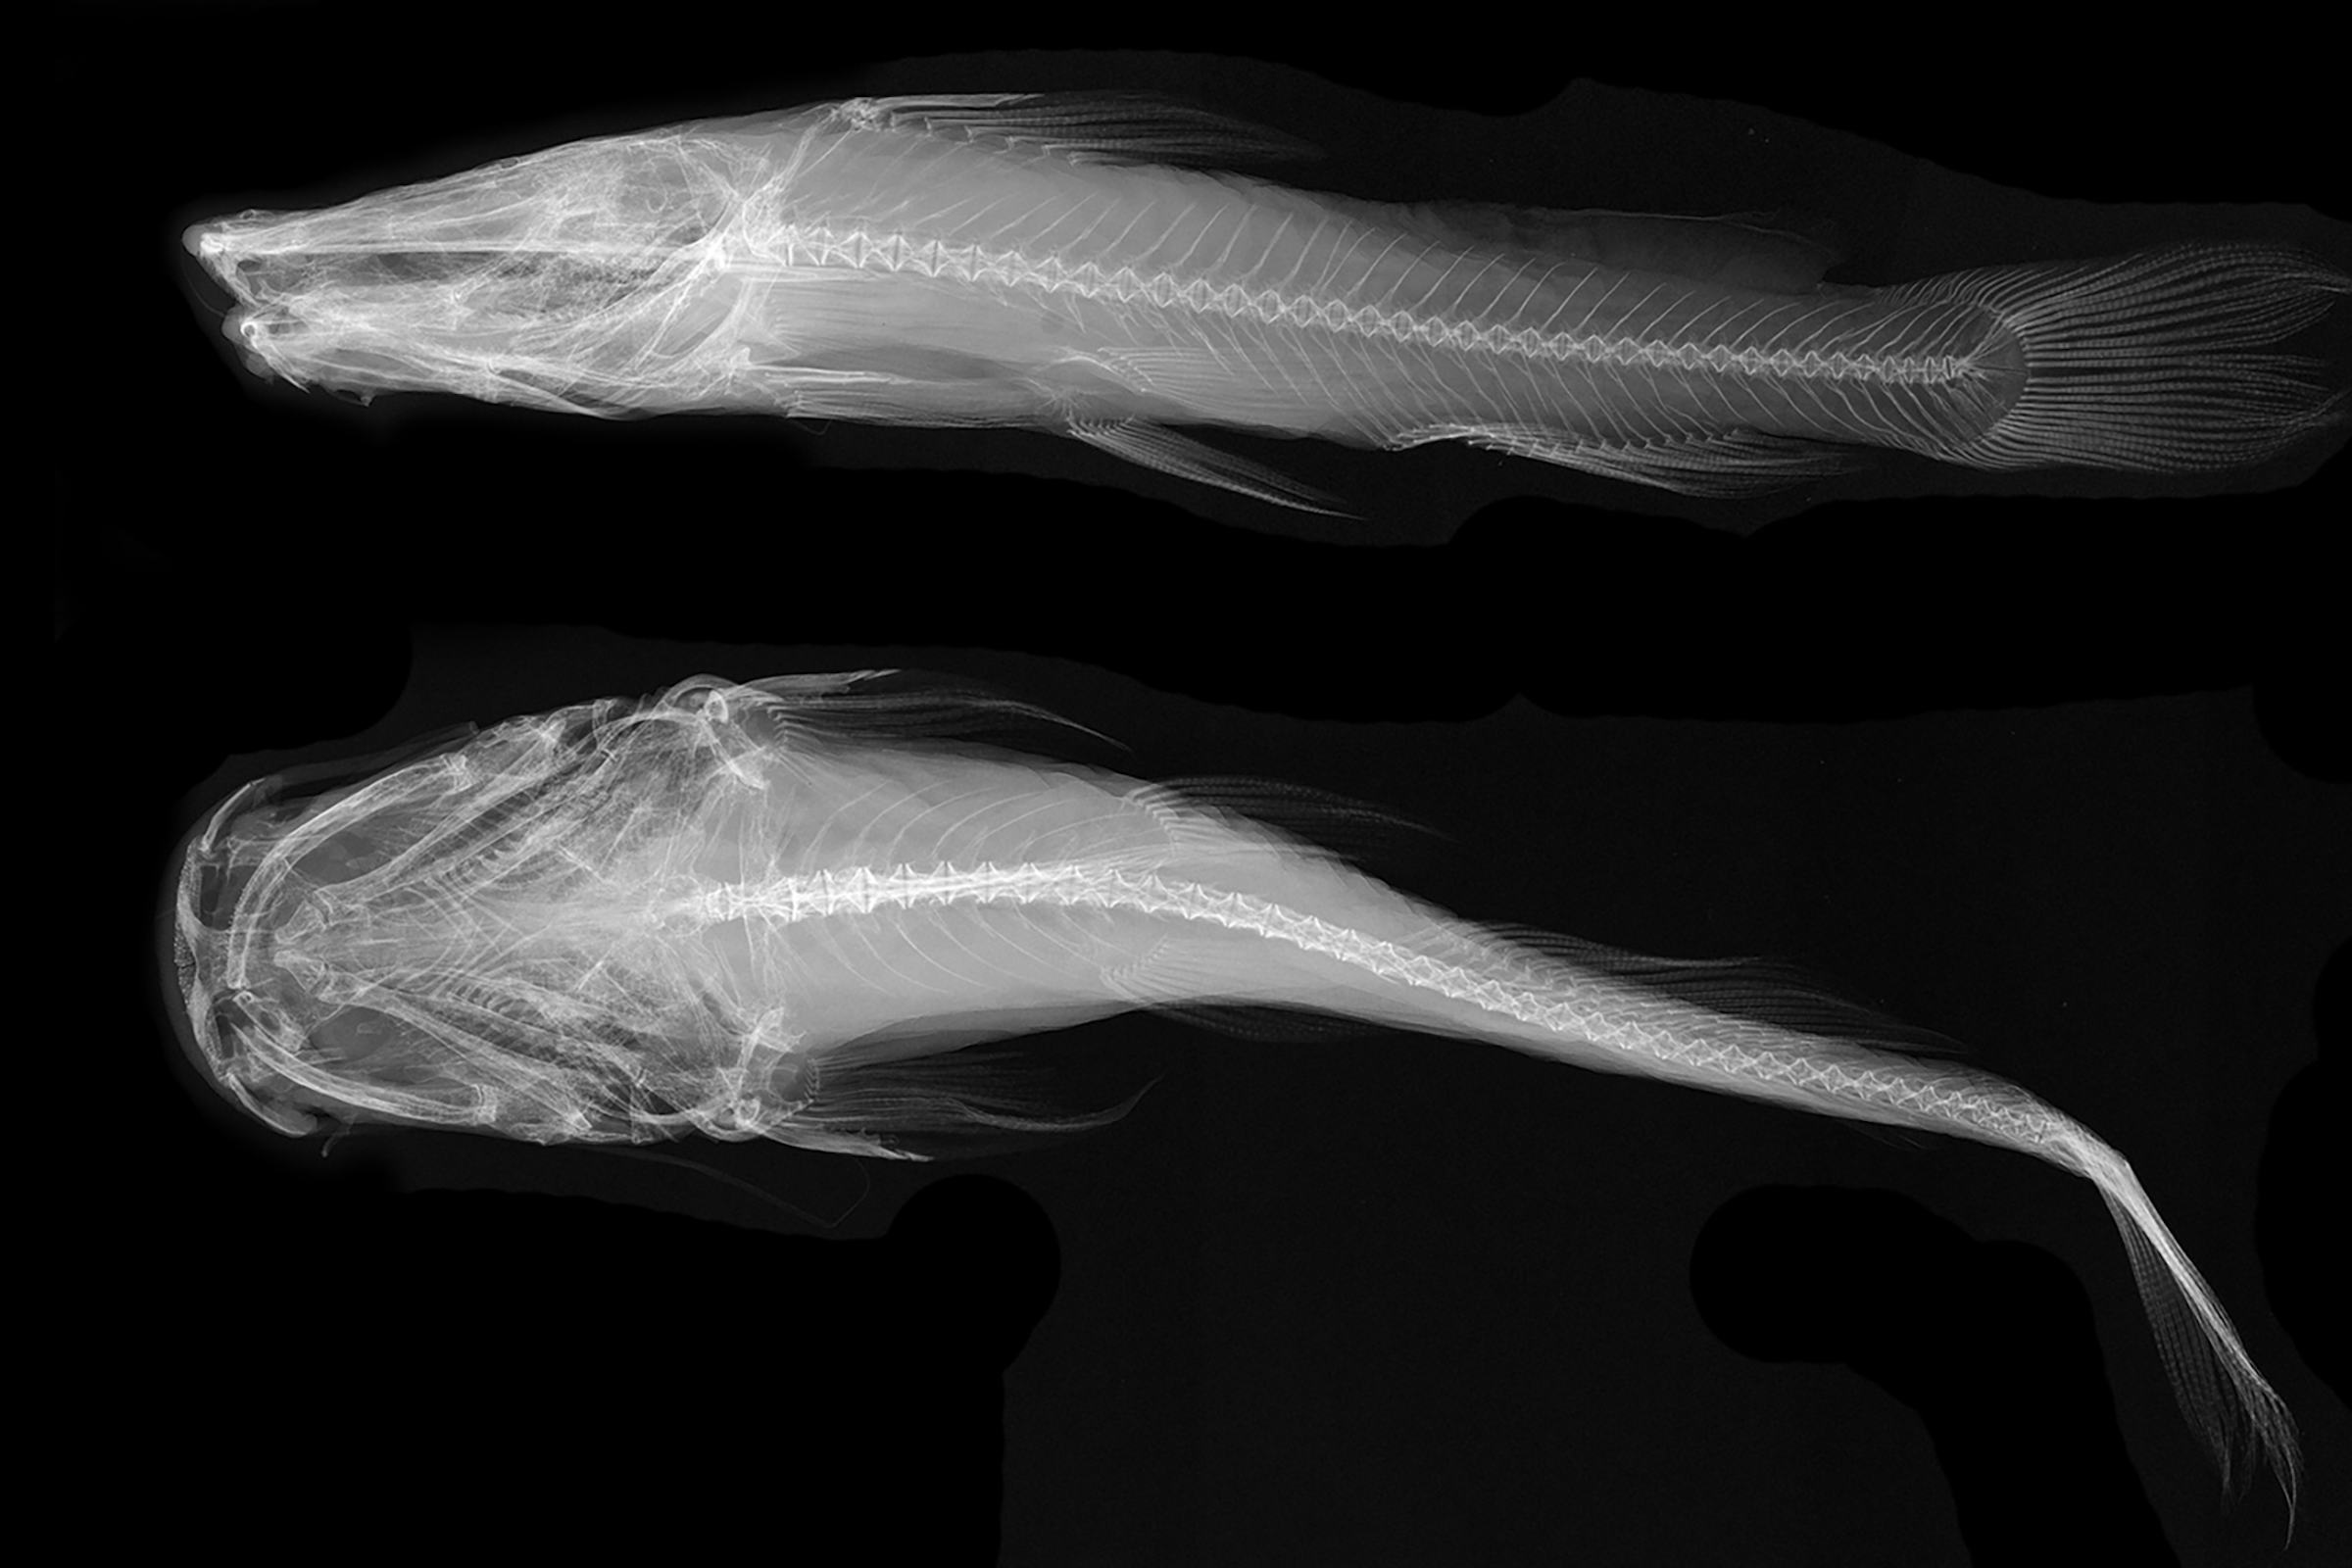 X-ray image of a fish from above and from the side